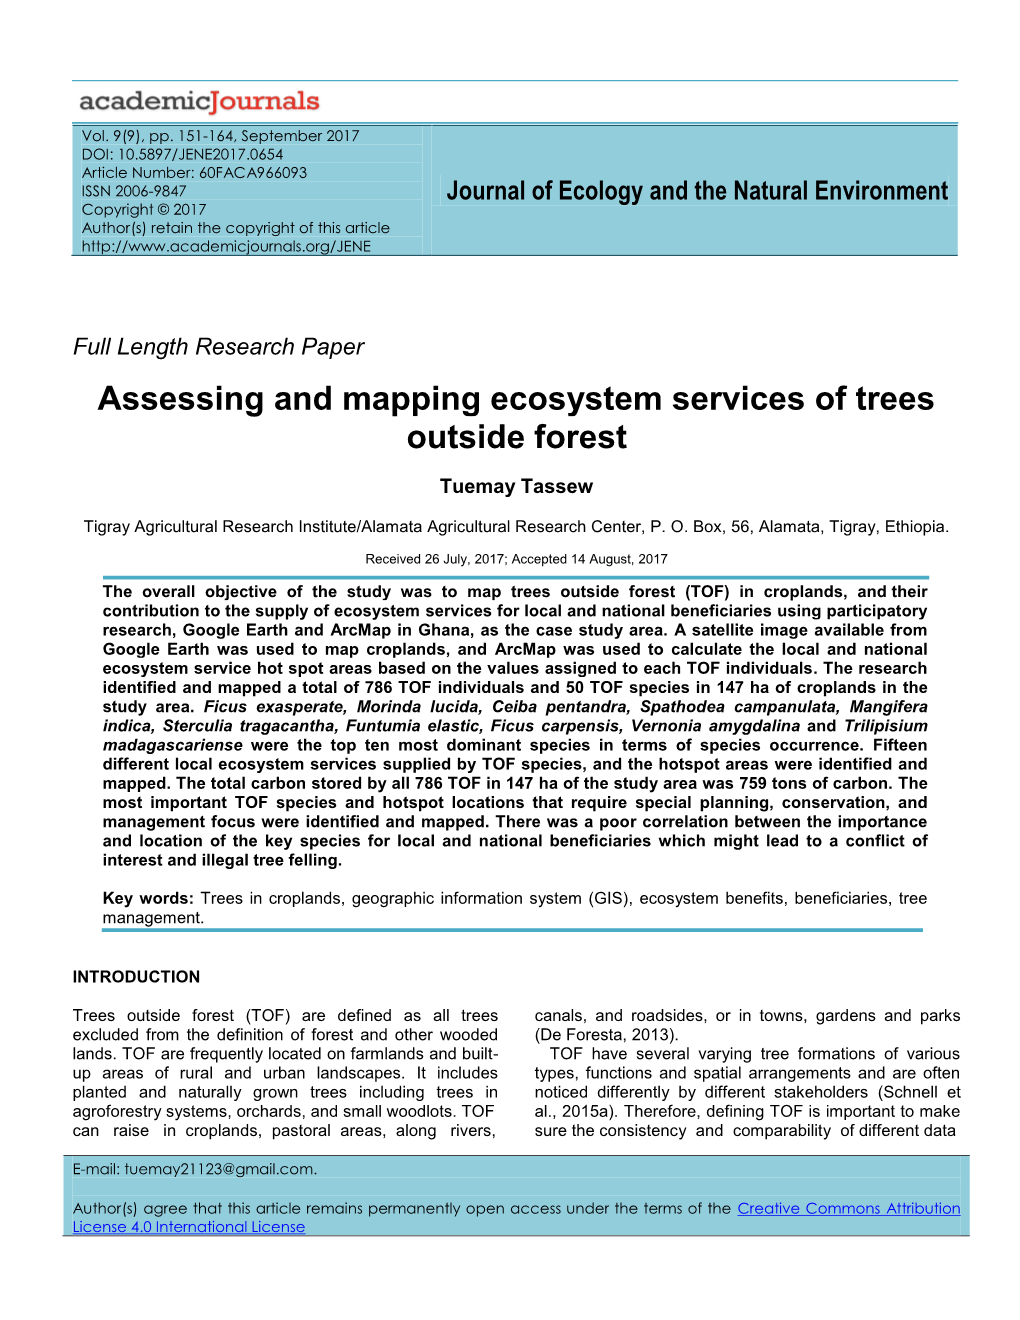 Assessing and Mapping Ecosystem Services of Trees Outside Forest